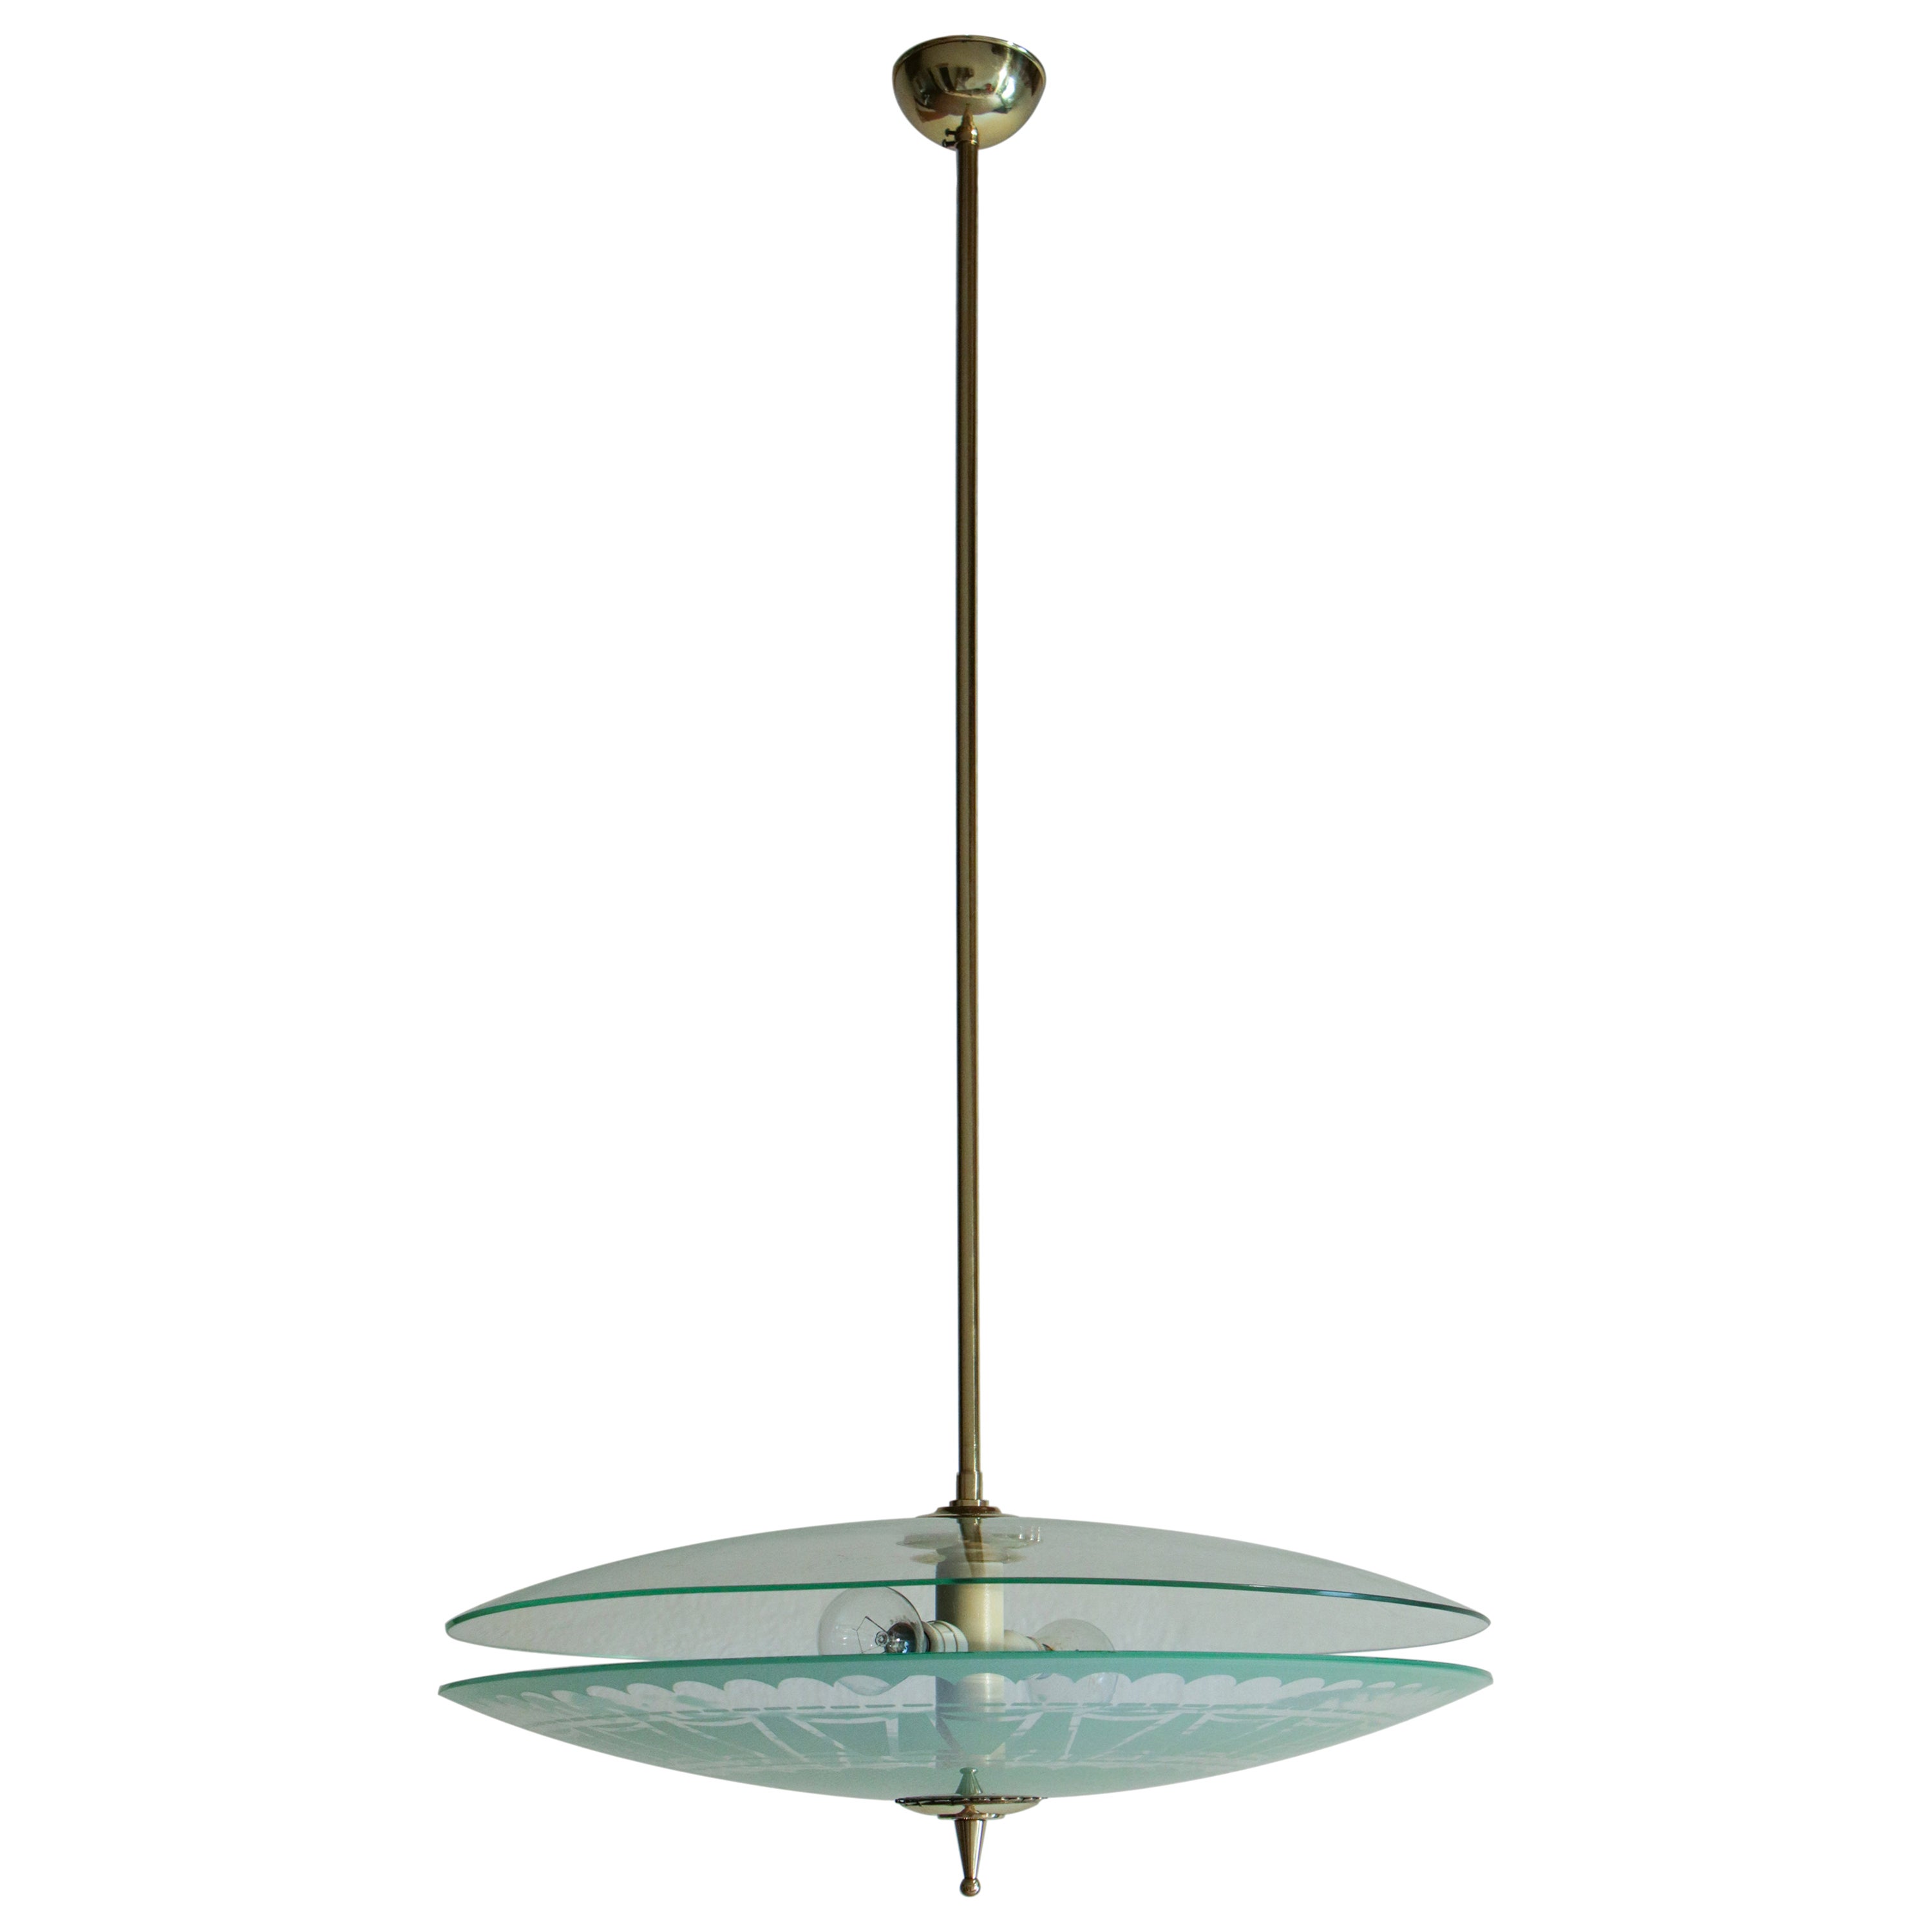 Italian Mid-Century Modern Double Disc Decorated Glass Pendant Lamp, 1950s For Sale